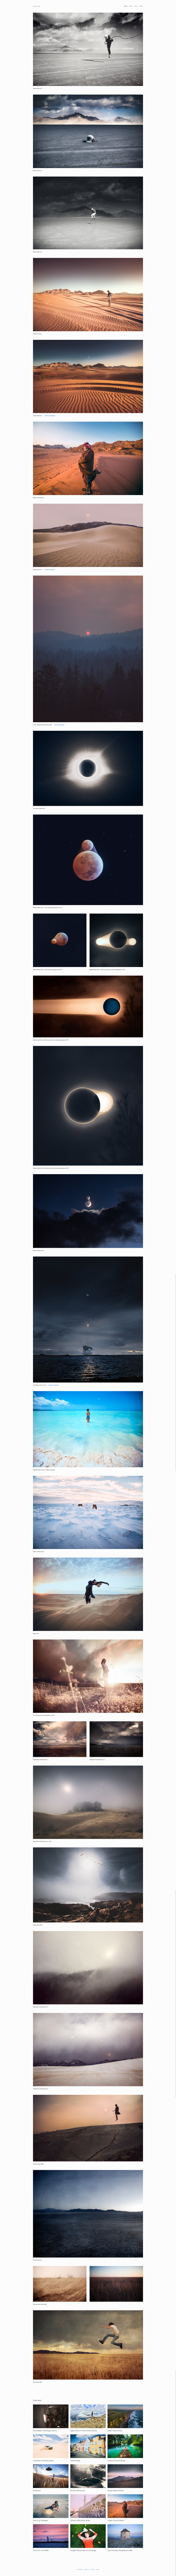 Cole Rise Landing Page Example: Cole Rise is a fine art and travel photographer who’s work flirts with space and the surreal. When not behind a camera, he’s a serial entrepreneur, designer, pilot, and space camera maker. He’s known for designing the Instagram filters and icon.